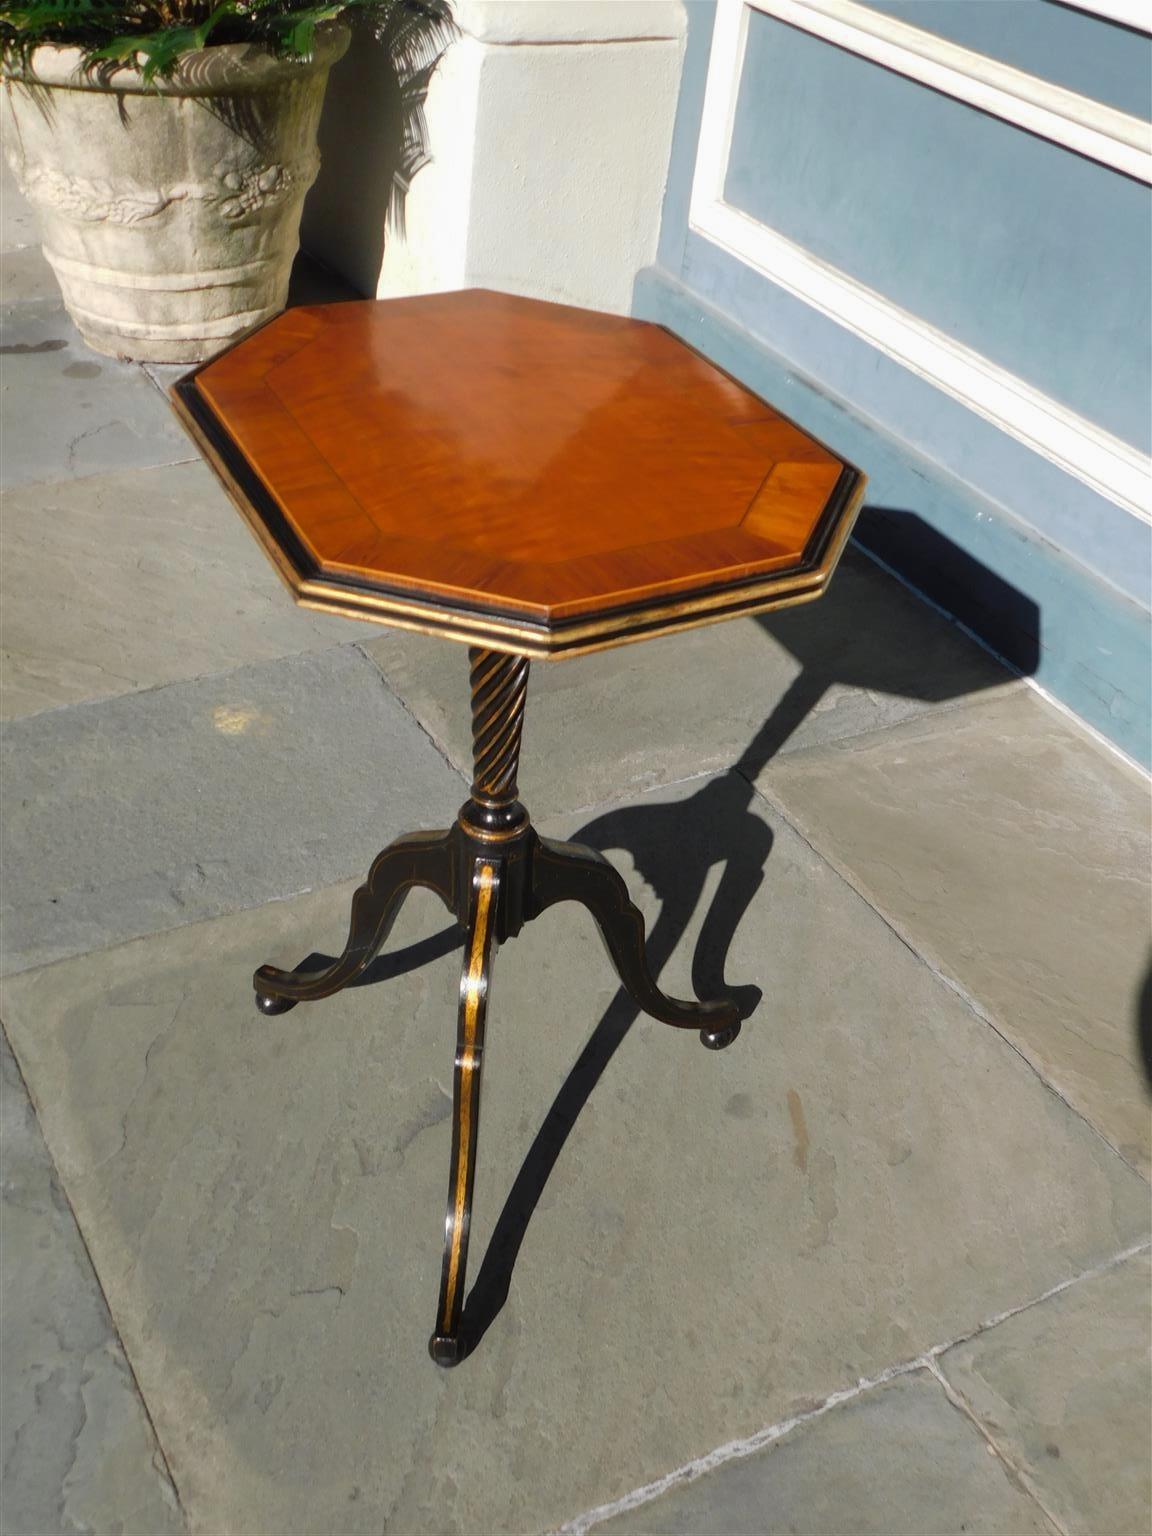 English Regency Painted & Gilt Satinwood Inlaid Tripod Candle Stand, Circa 1790 In Excellent Condition For Sale In Hollywood, SC